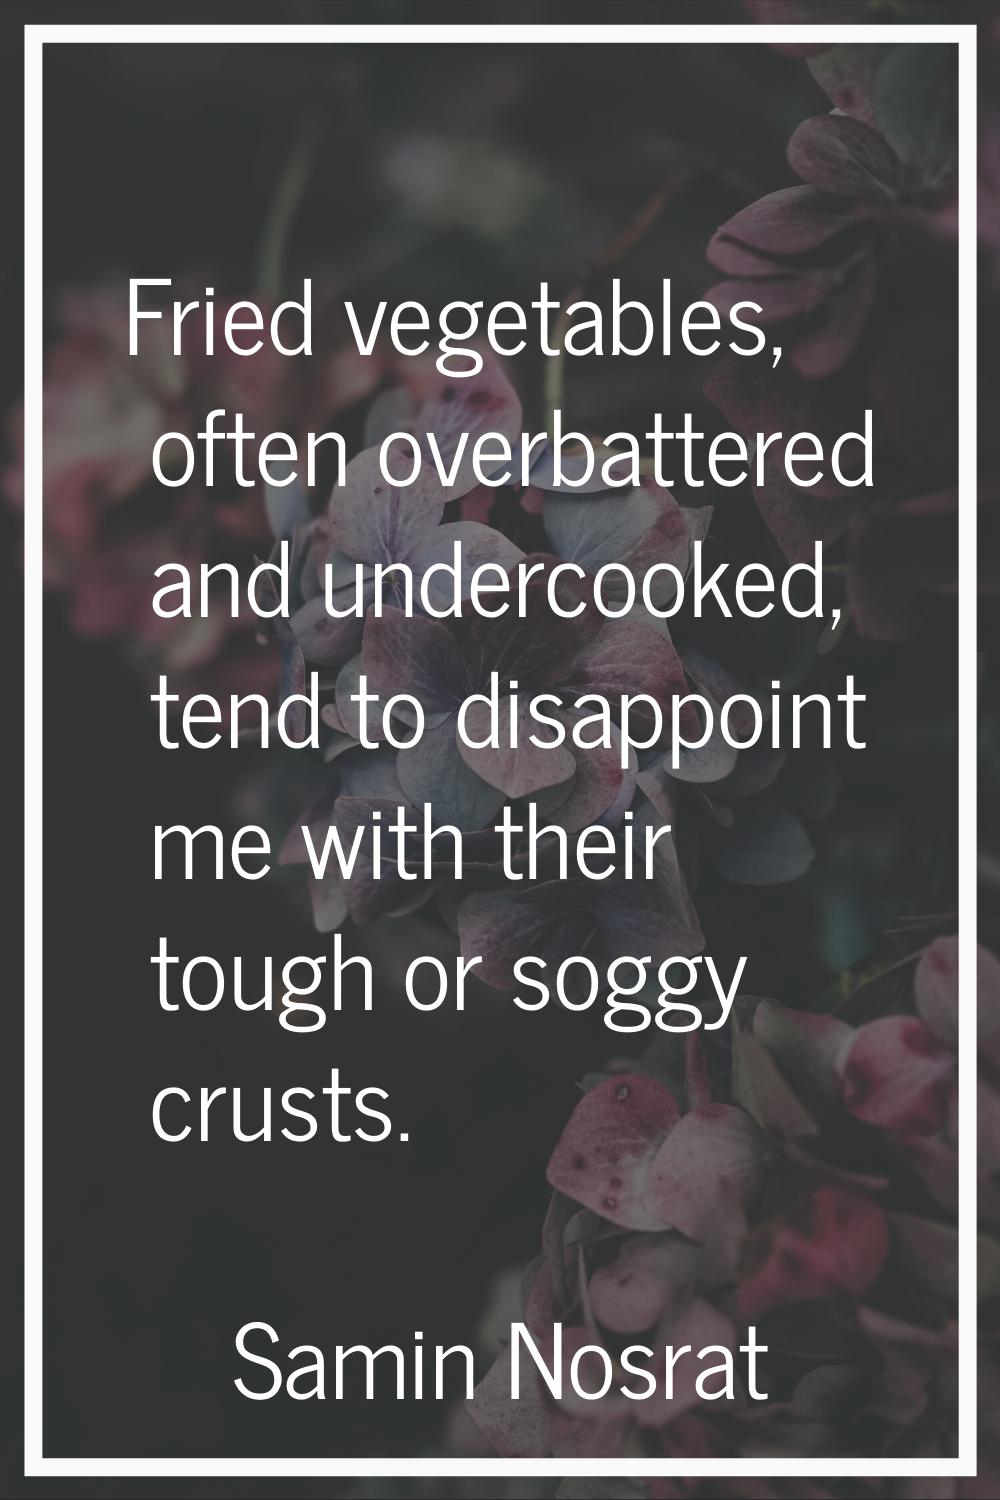 Fried vegetables, often overbattered and undercooked, tend to disappoint me with their tough or sog